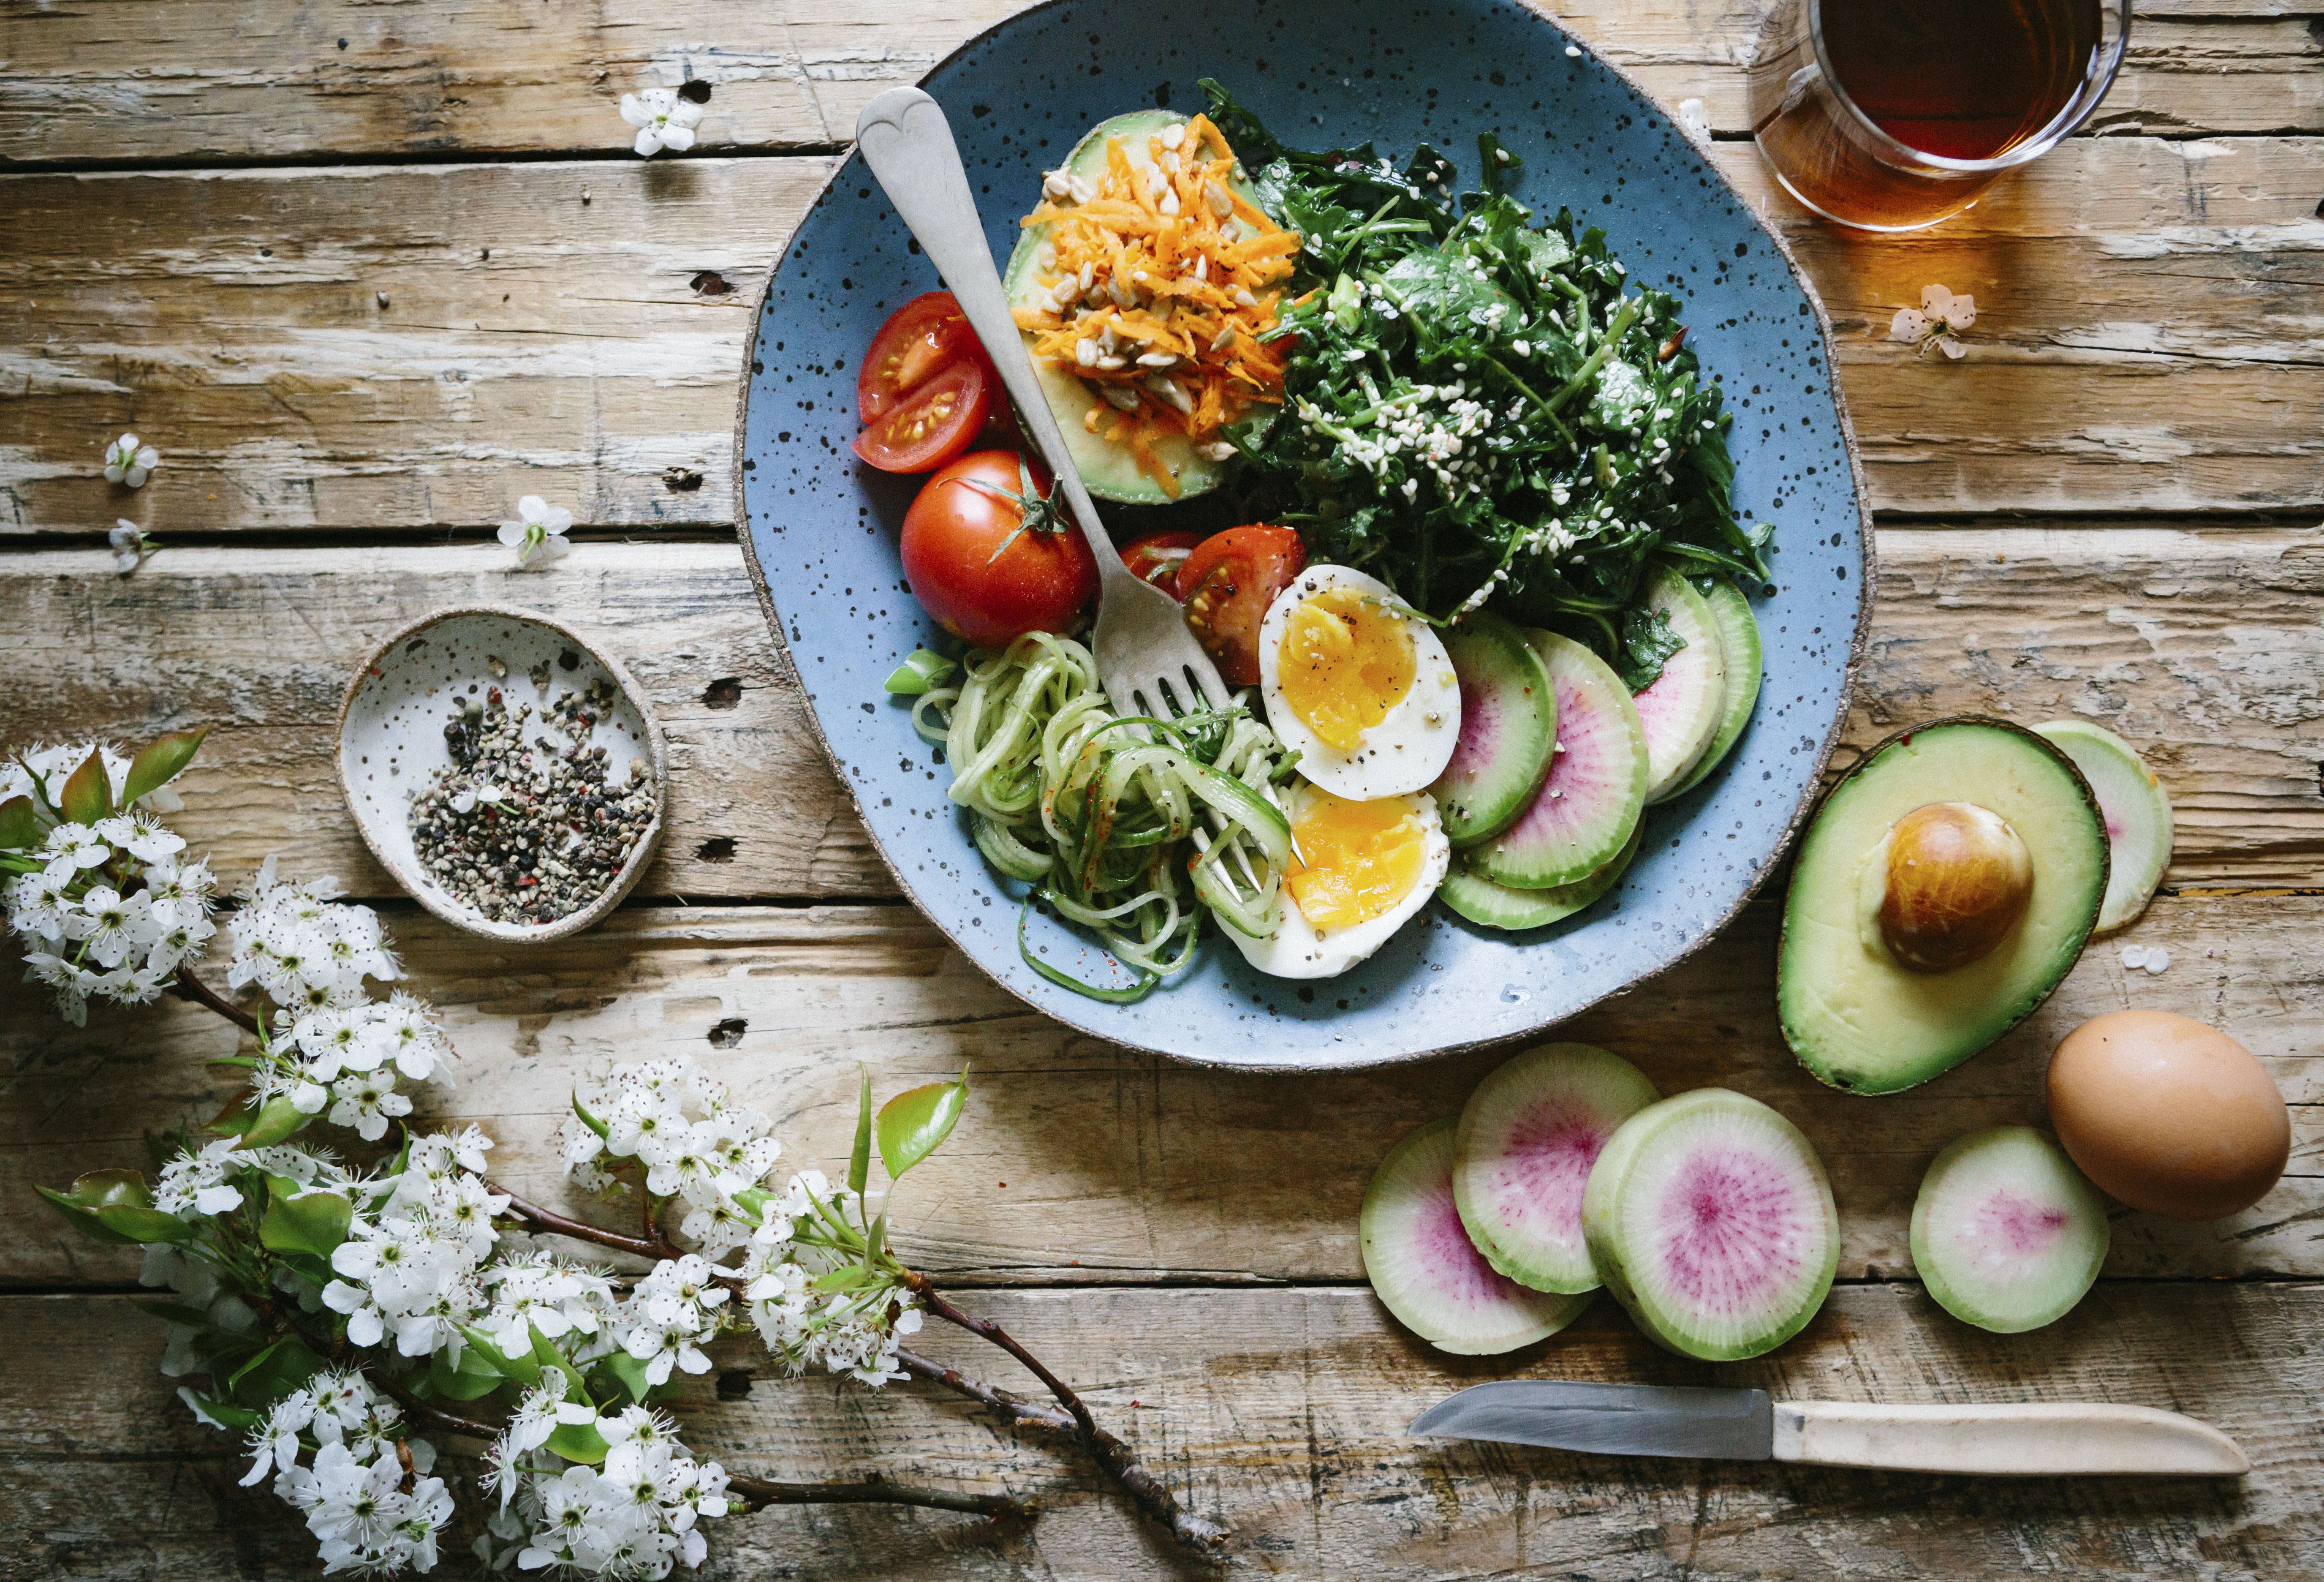 THE SCANDI SENSE DIET: Lose Weight and Keep It Off with the